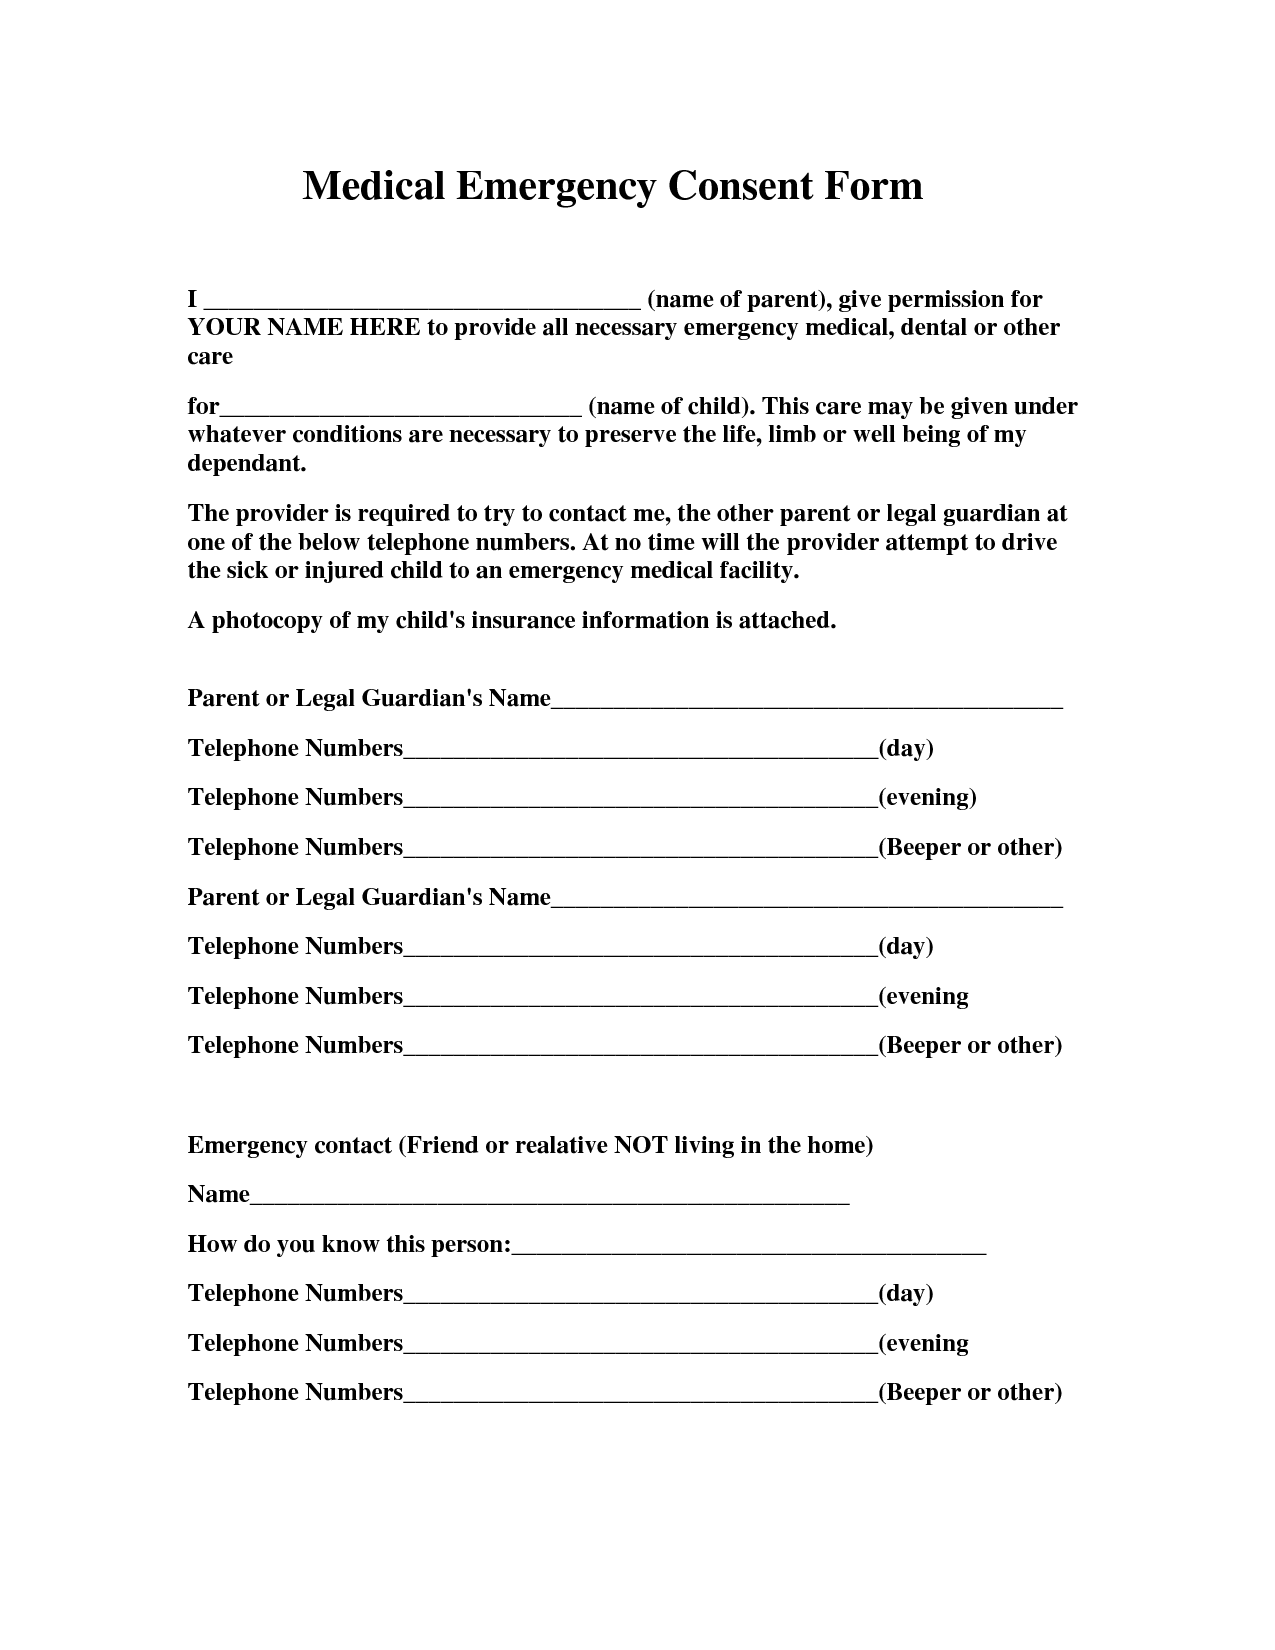 printable-consent-form-printable-forms-free-online